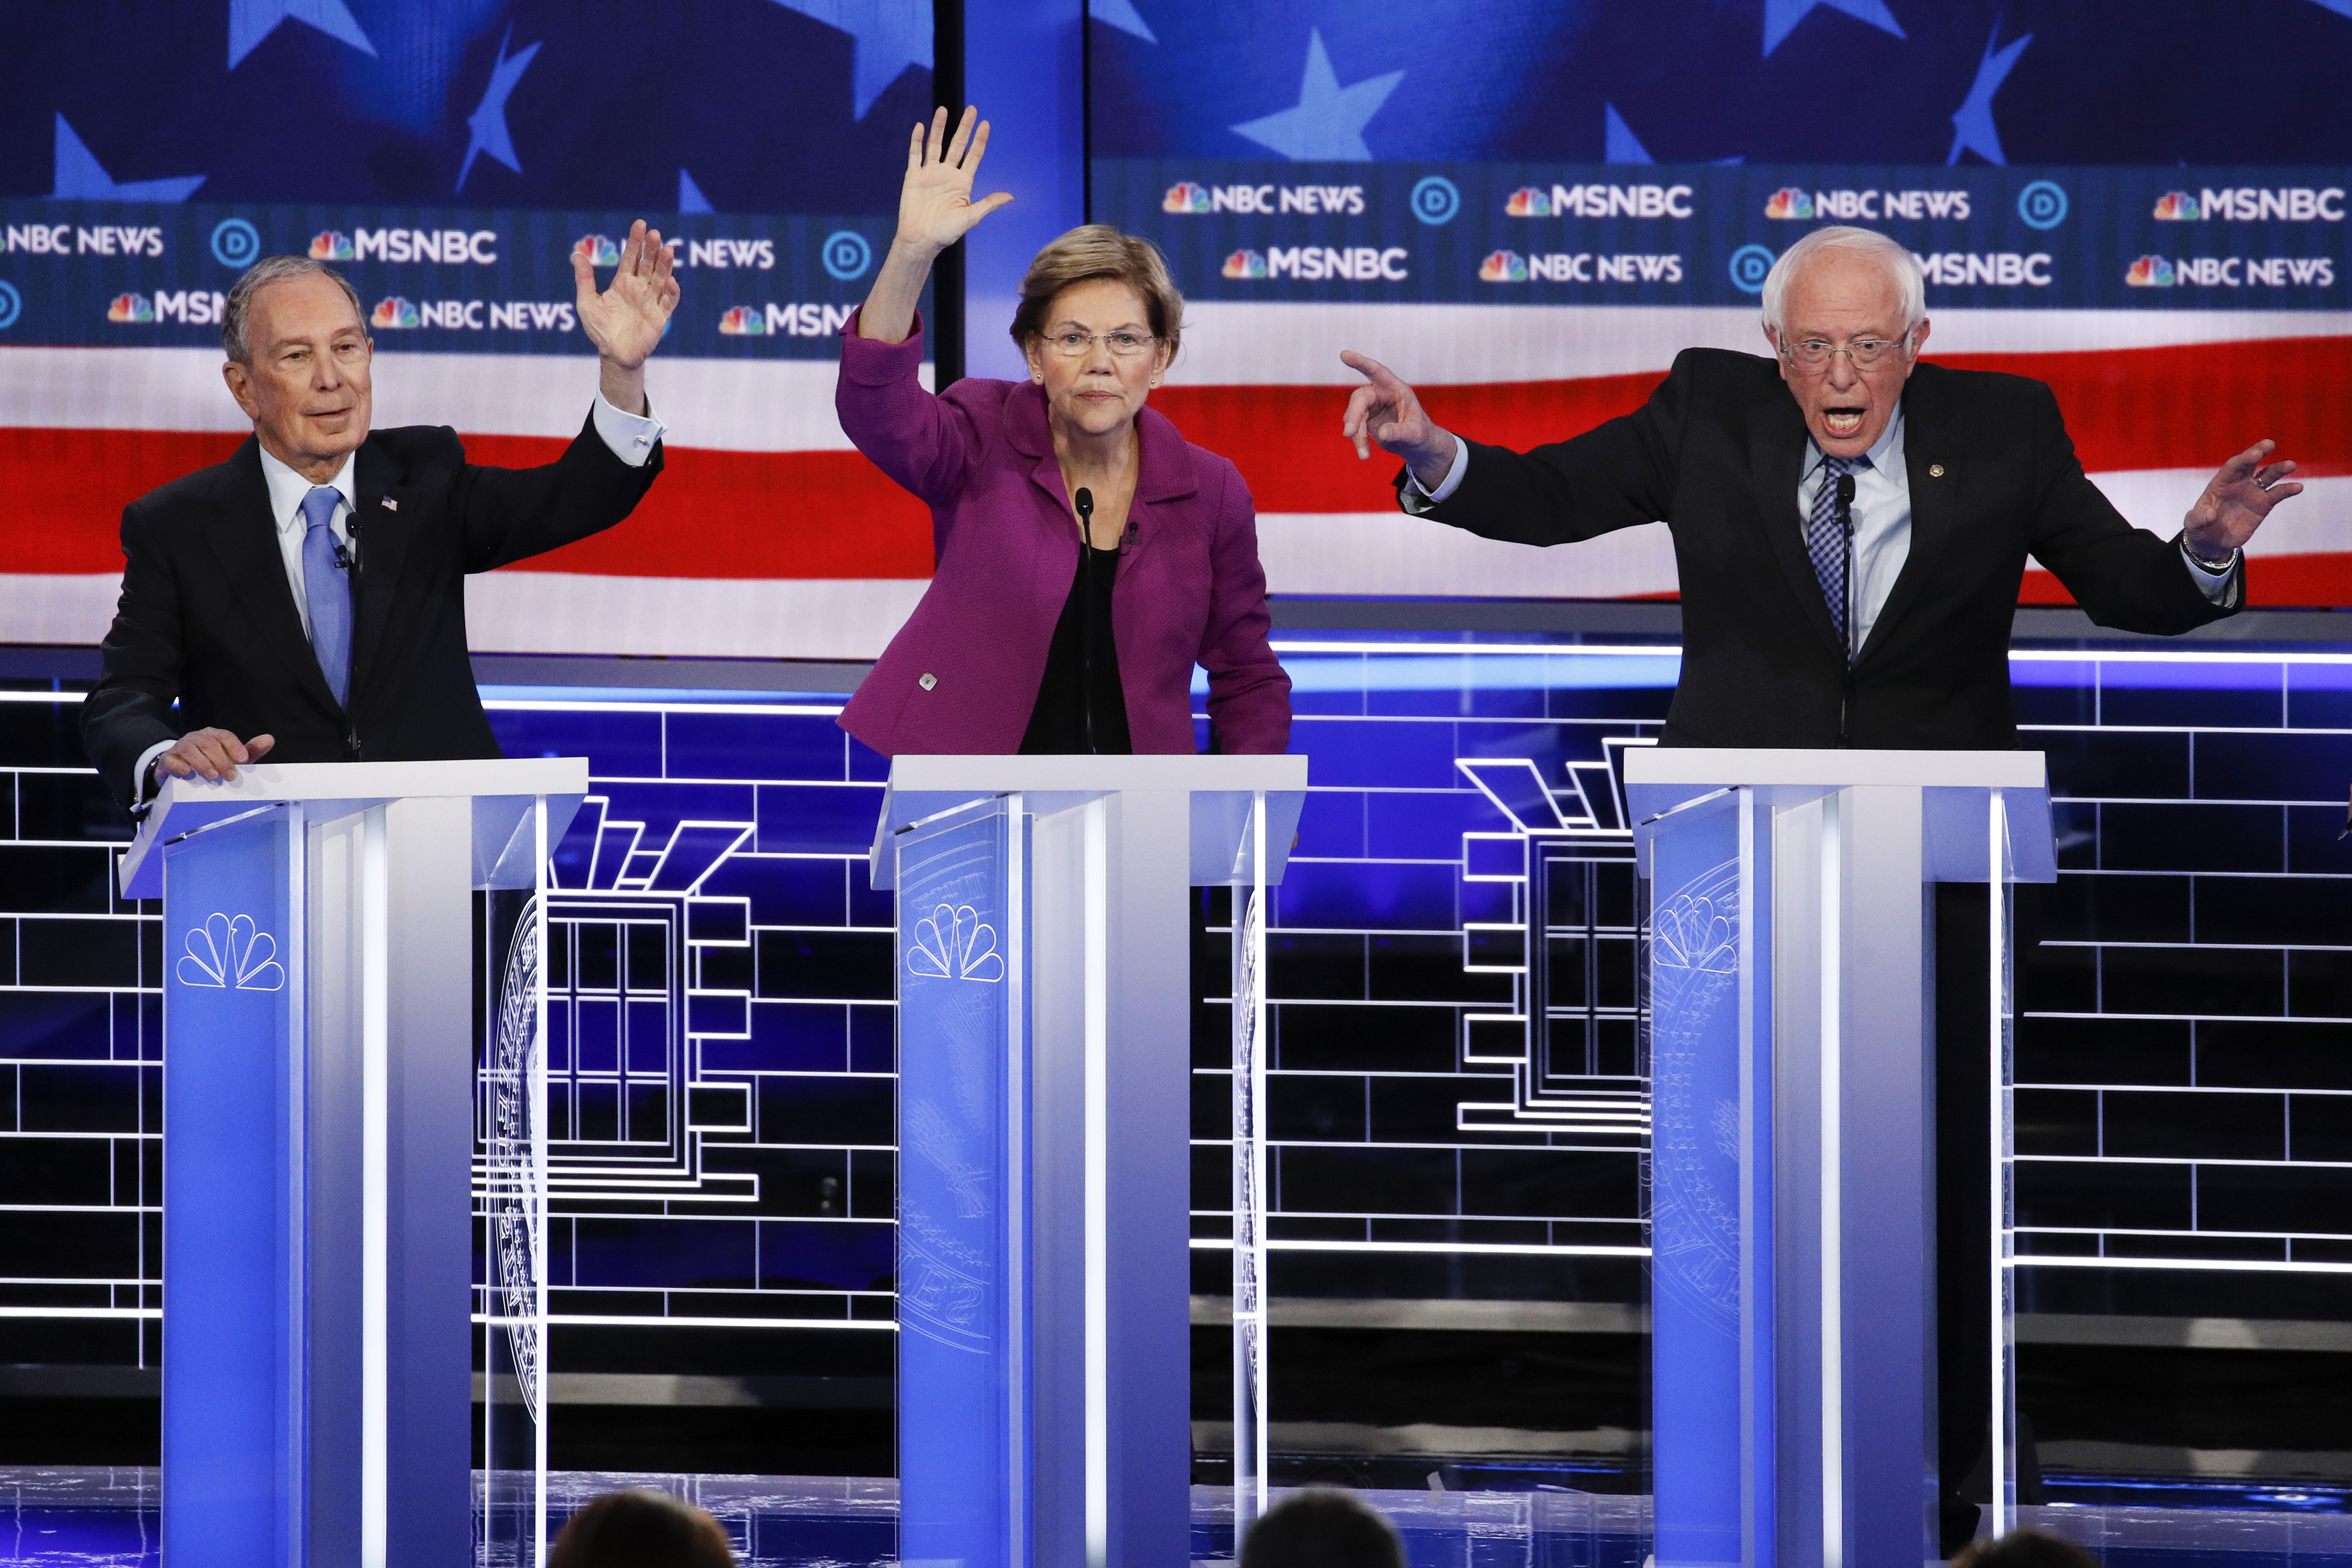 From left, Democratic presidential candidates, former New York City Mayor Mike Bloomberg, Sen. Elizabeth Warren, D-Mass.; and Sen. Bernie Sanders, I-Vt., participate in a Democratic presidential primary debate Wednesday, Feb. 19, 2020, in Las Vegas. Seven casino-resorts are among 200 caucus locations statewide that will host the presidential caucuses on Saturday. (AP Photo/John Locher)